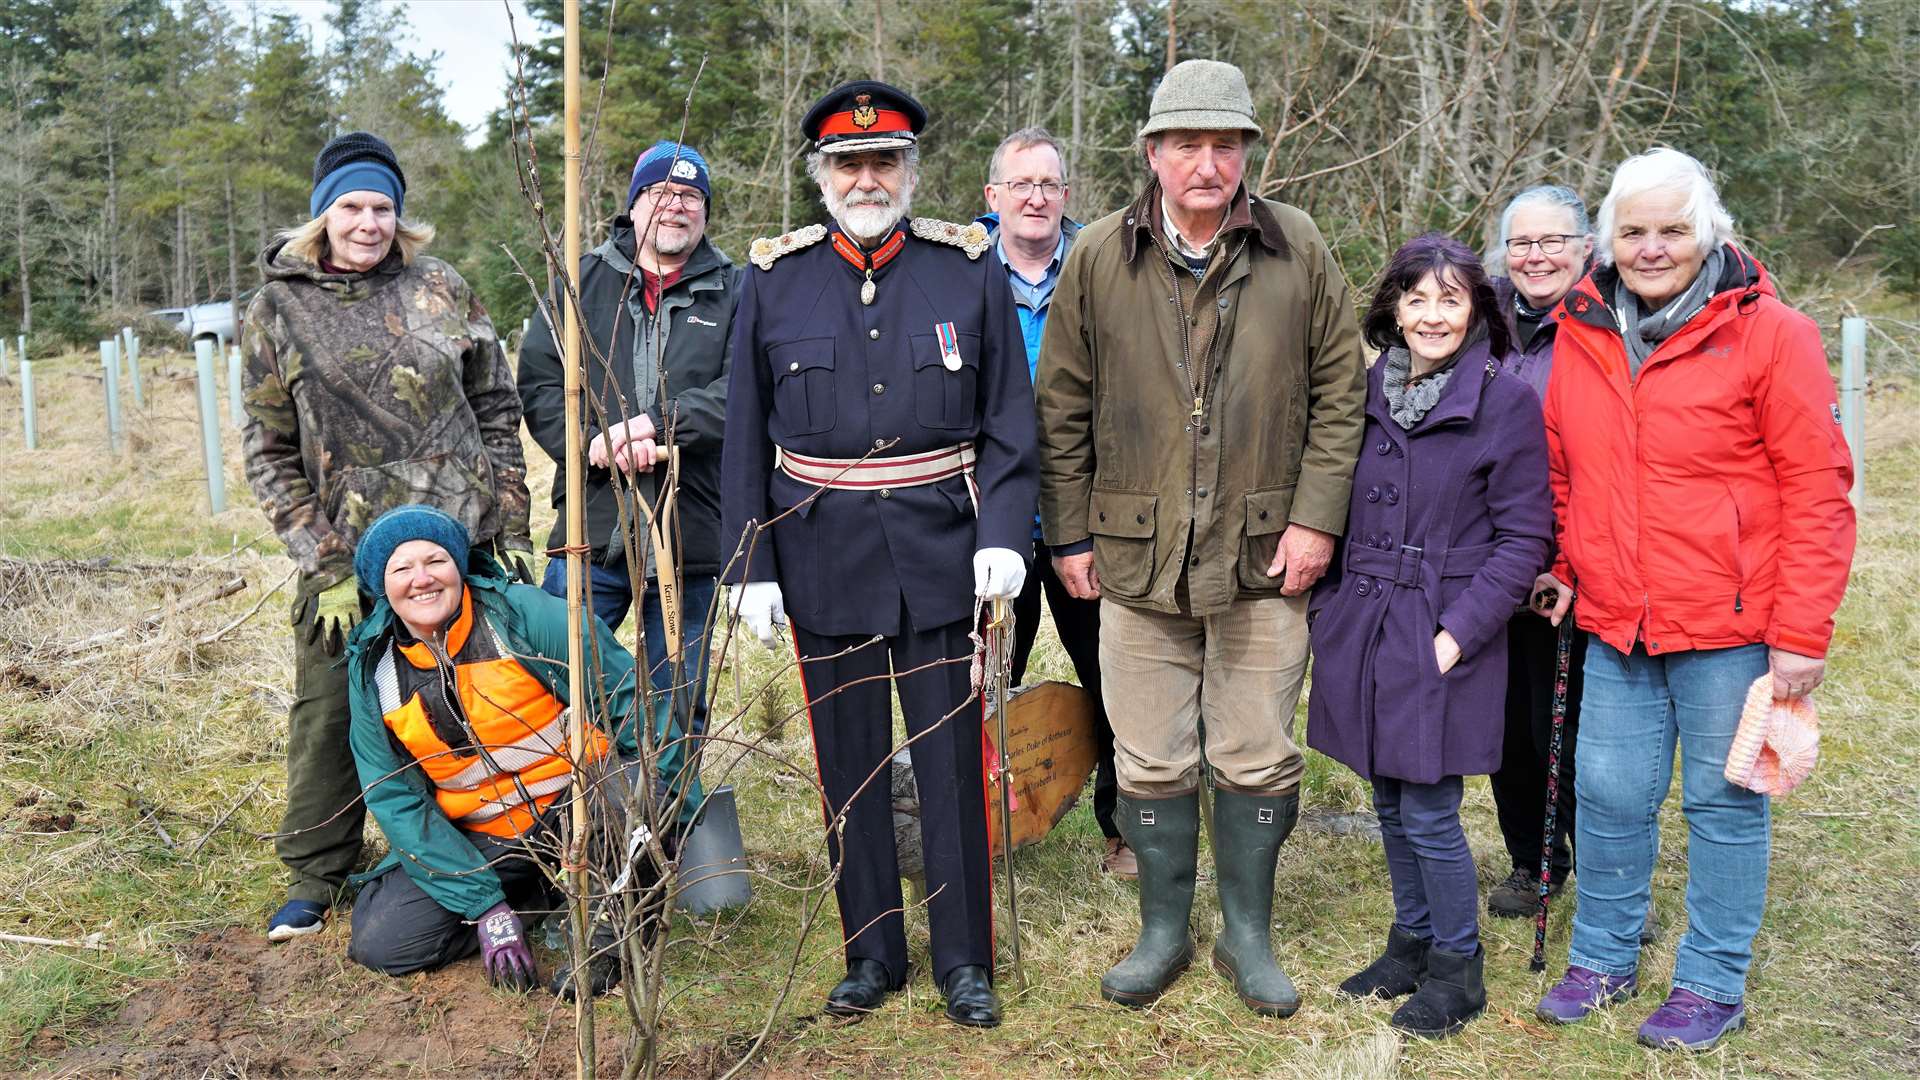 Lord Thurso, at centre, in his role as His Majesty's Lord-Lieutenant for Caithness with representatives of various voluntary organisations as well as members of the Dunnet Forest Trust at Wednesday's tree planting event. Picture: DGS